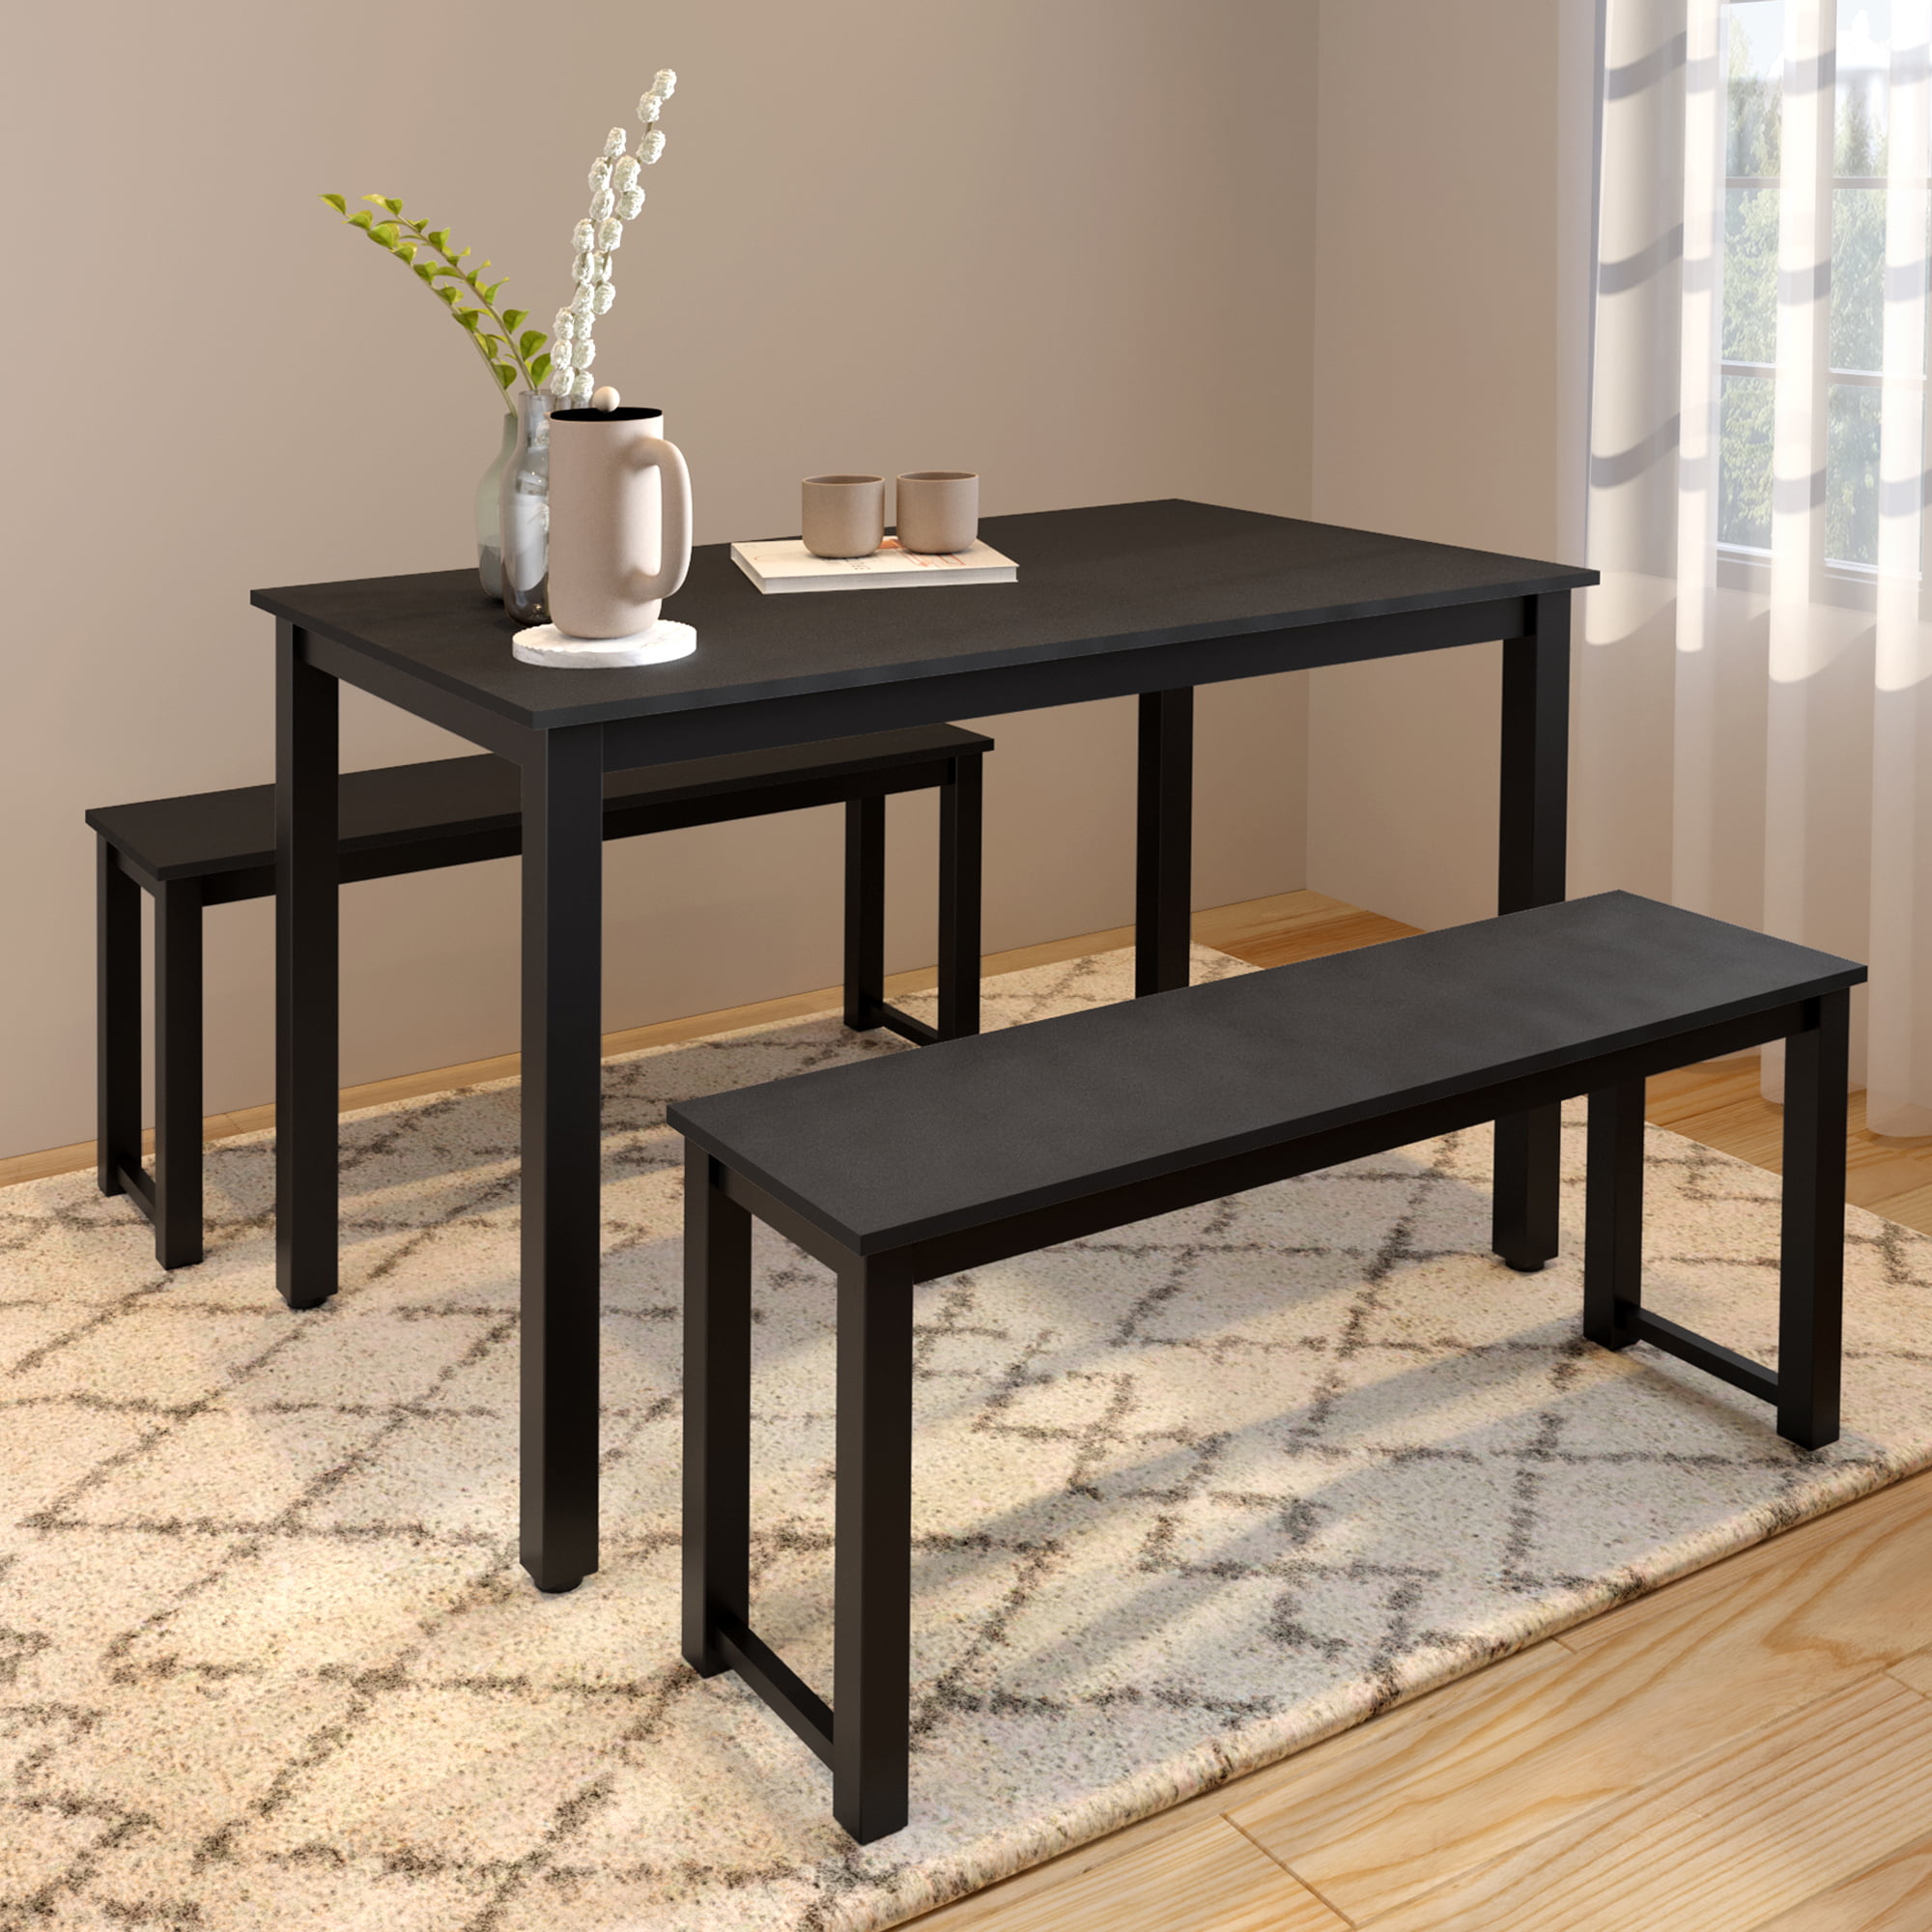 Kitchen Dining Table Set With 2 Benches, Black Kitchen Table And Chairs Bench